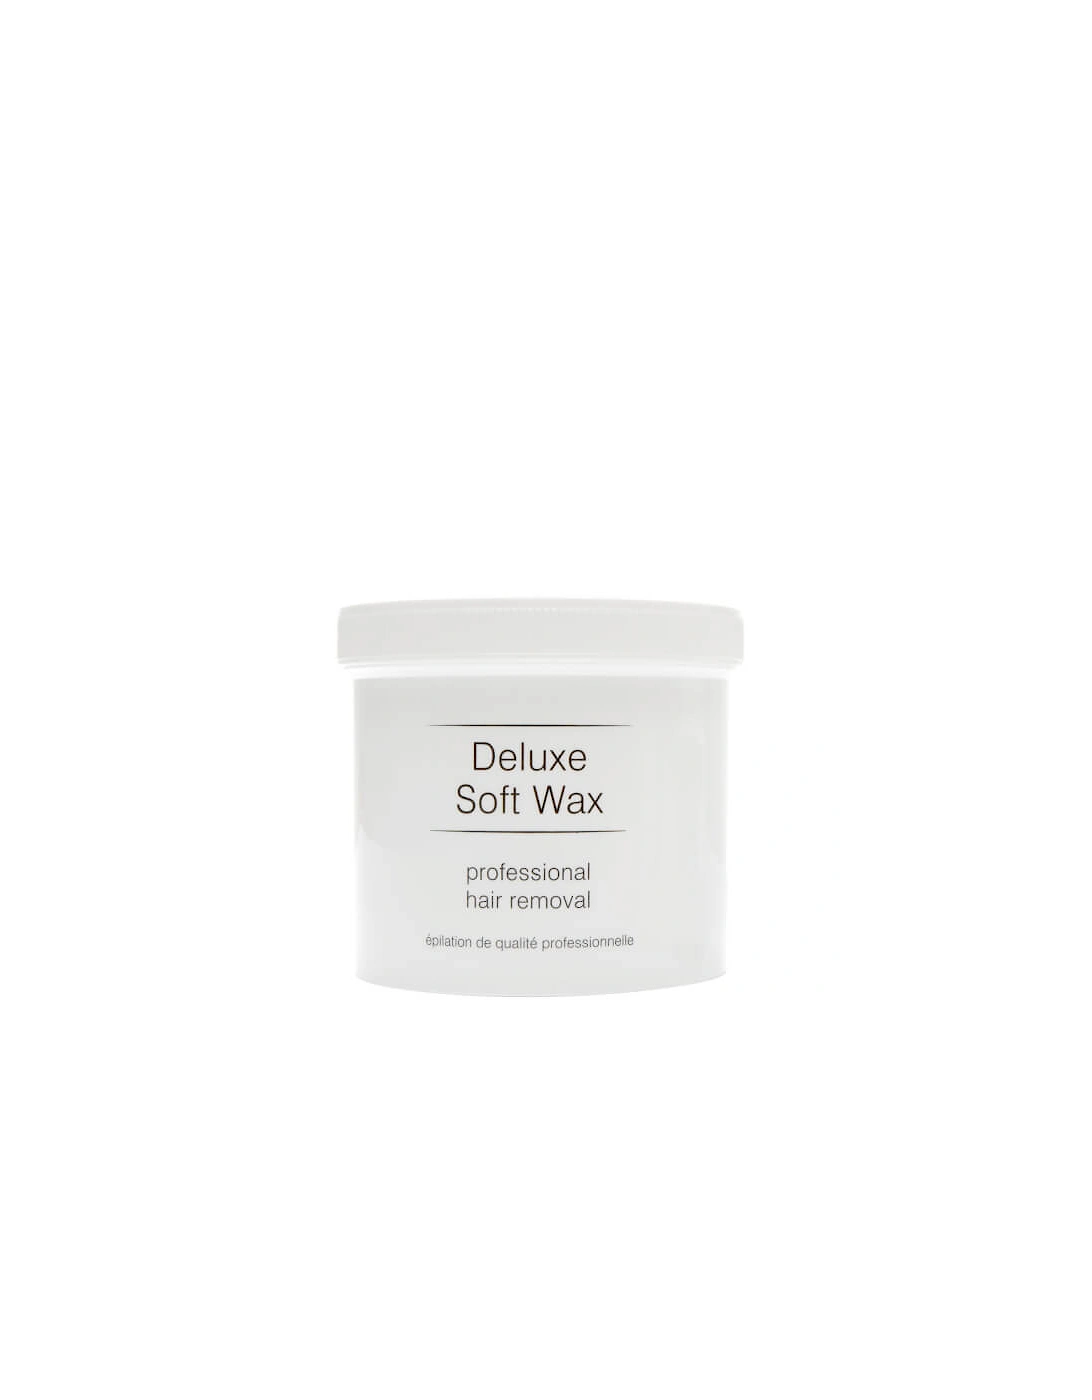 Deluxe Soft Wax, 2 of 1